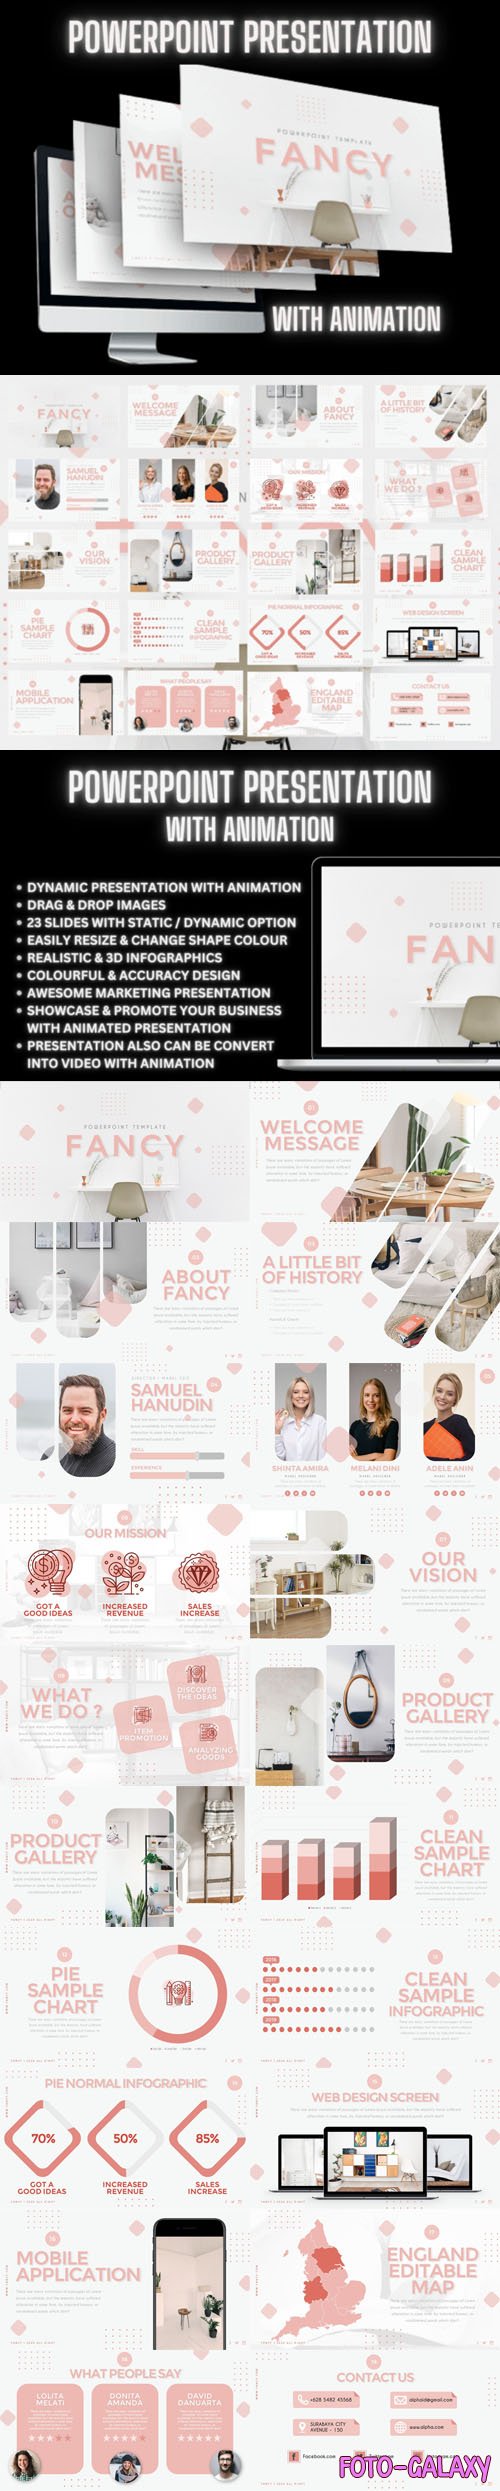 Fancy - Amazing Animated PowerPoint Presentation Template